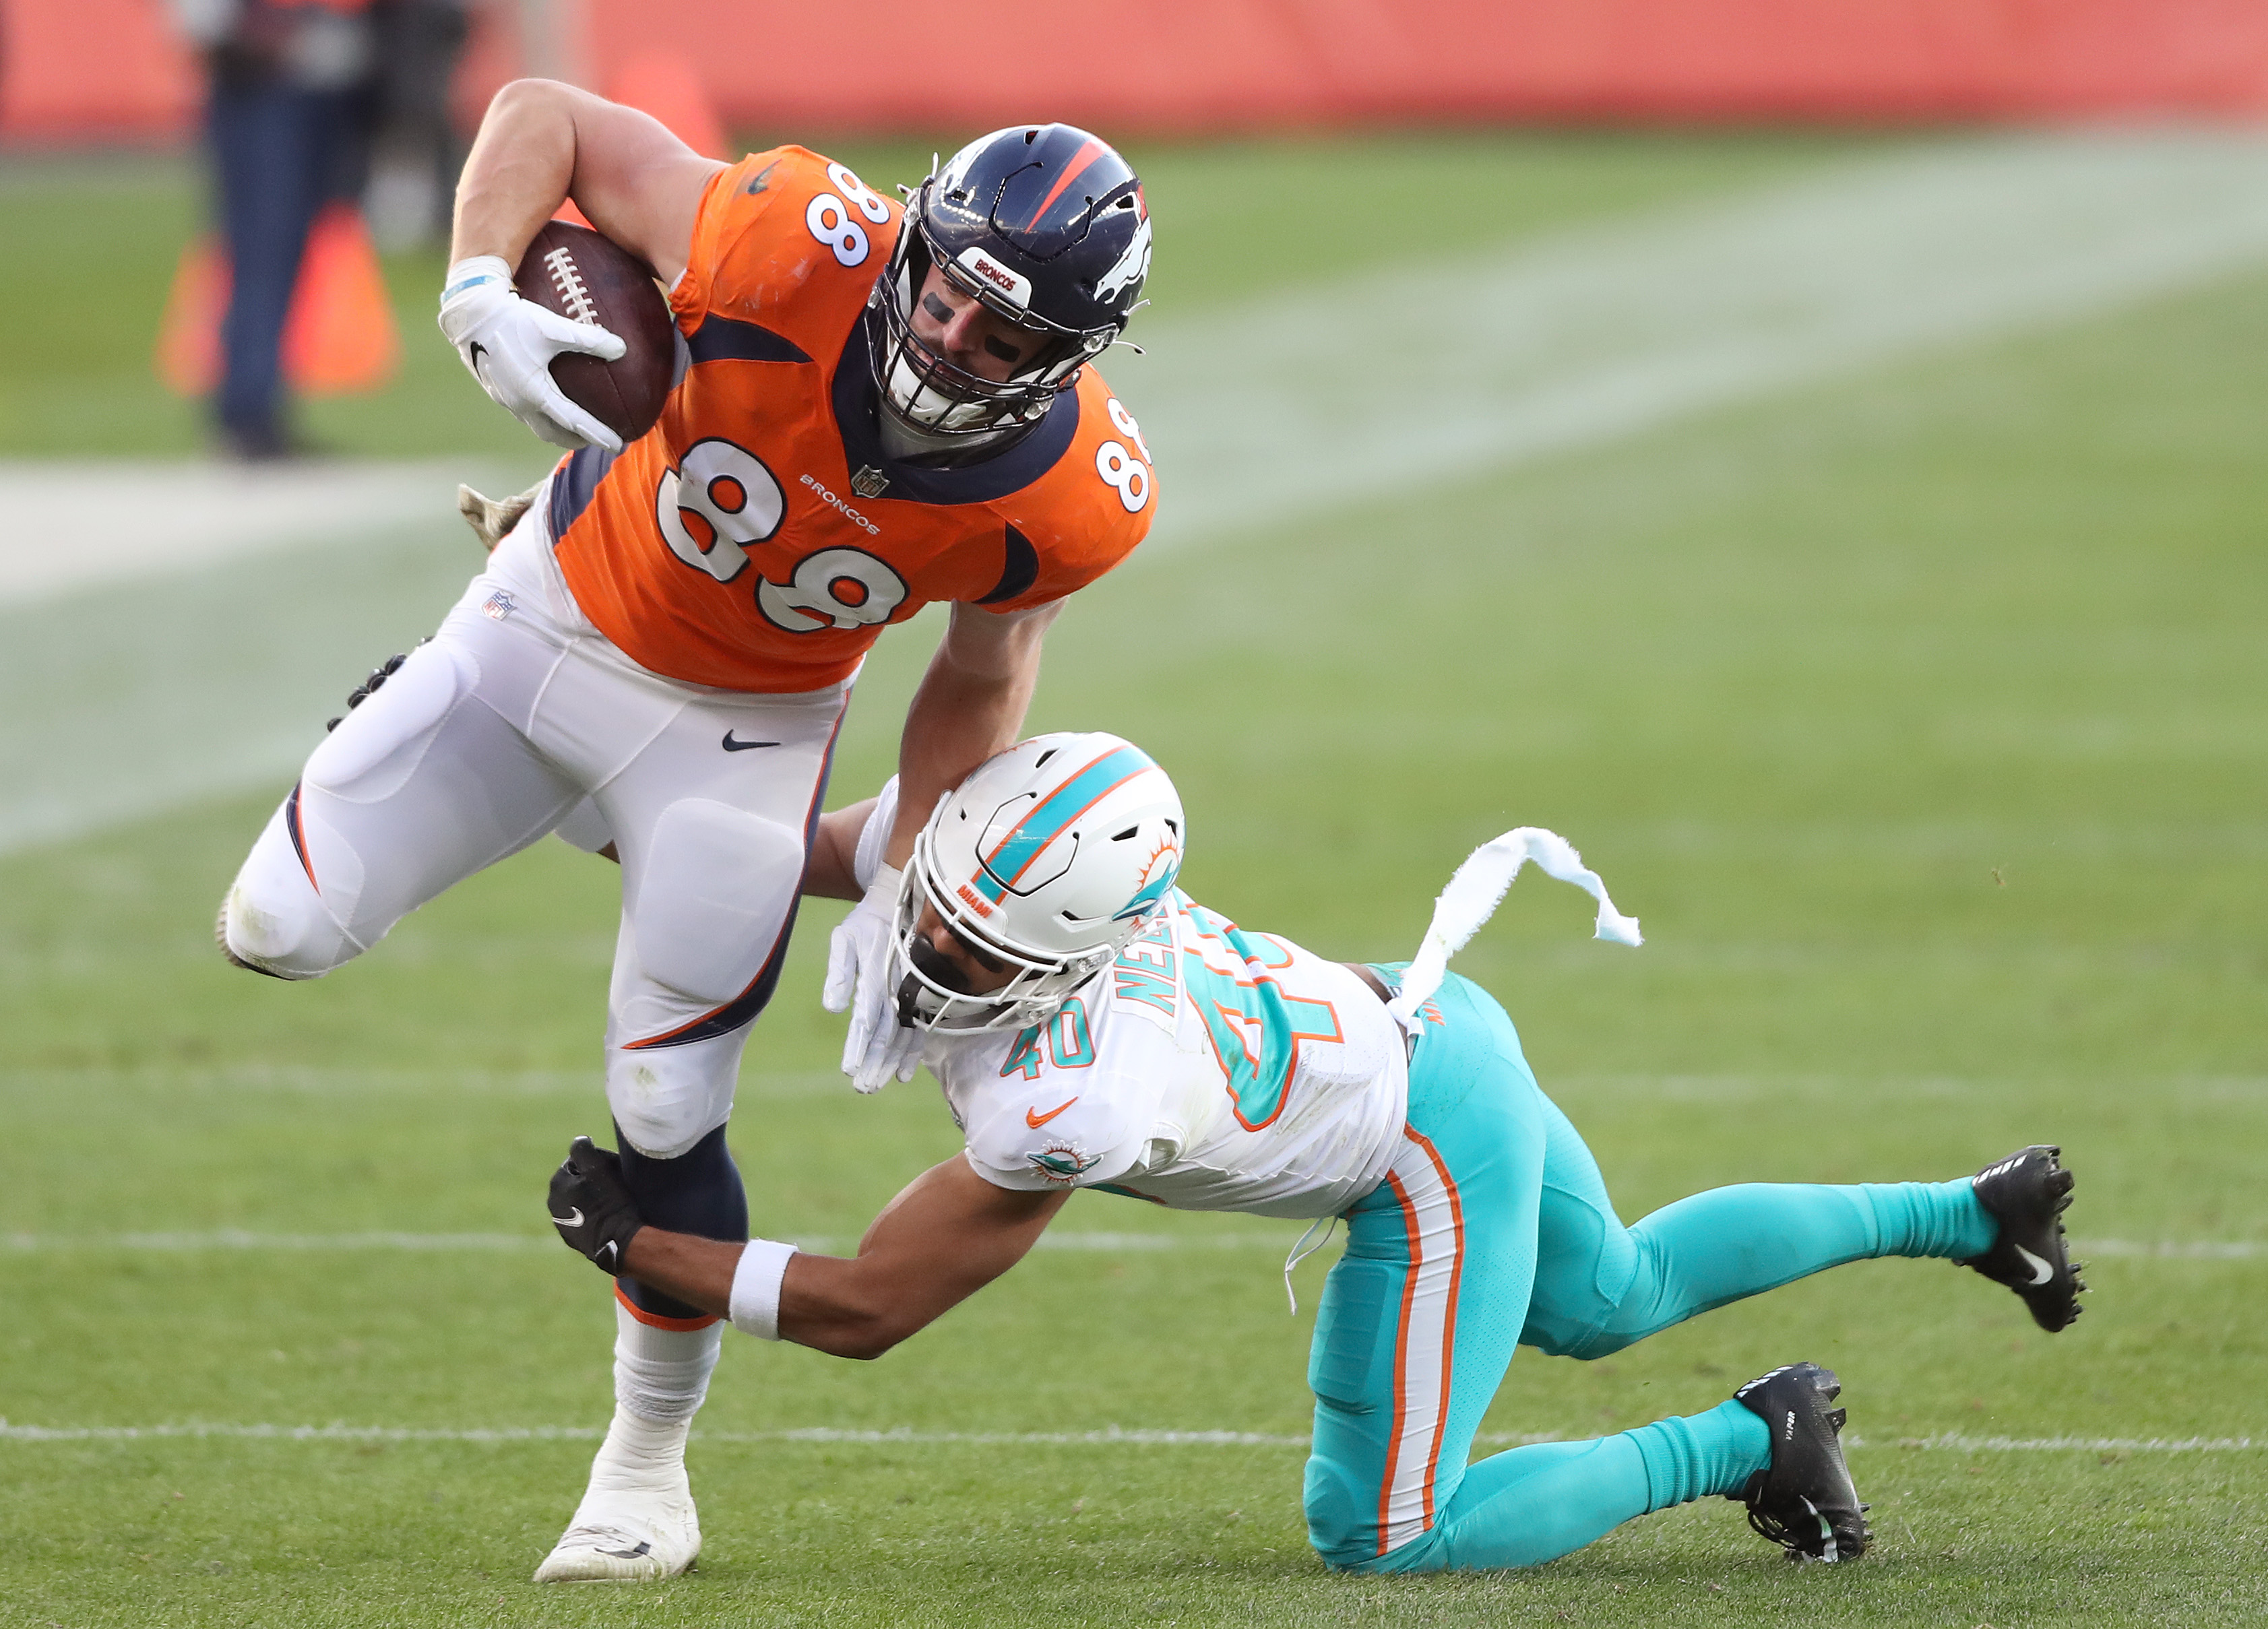 How to Stream the Broncos vs. Dolphins Game Live - Week 3